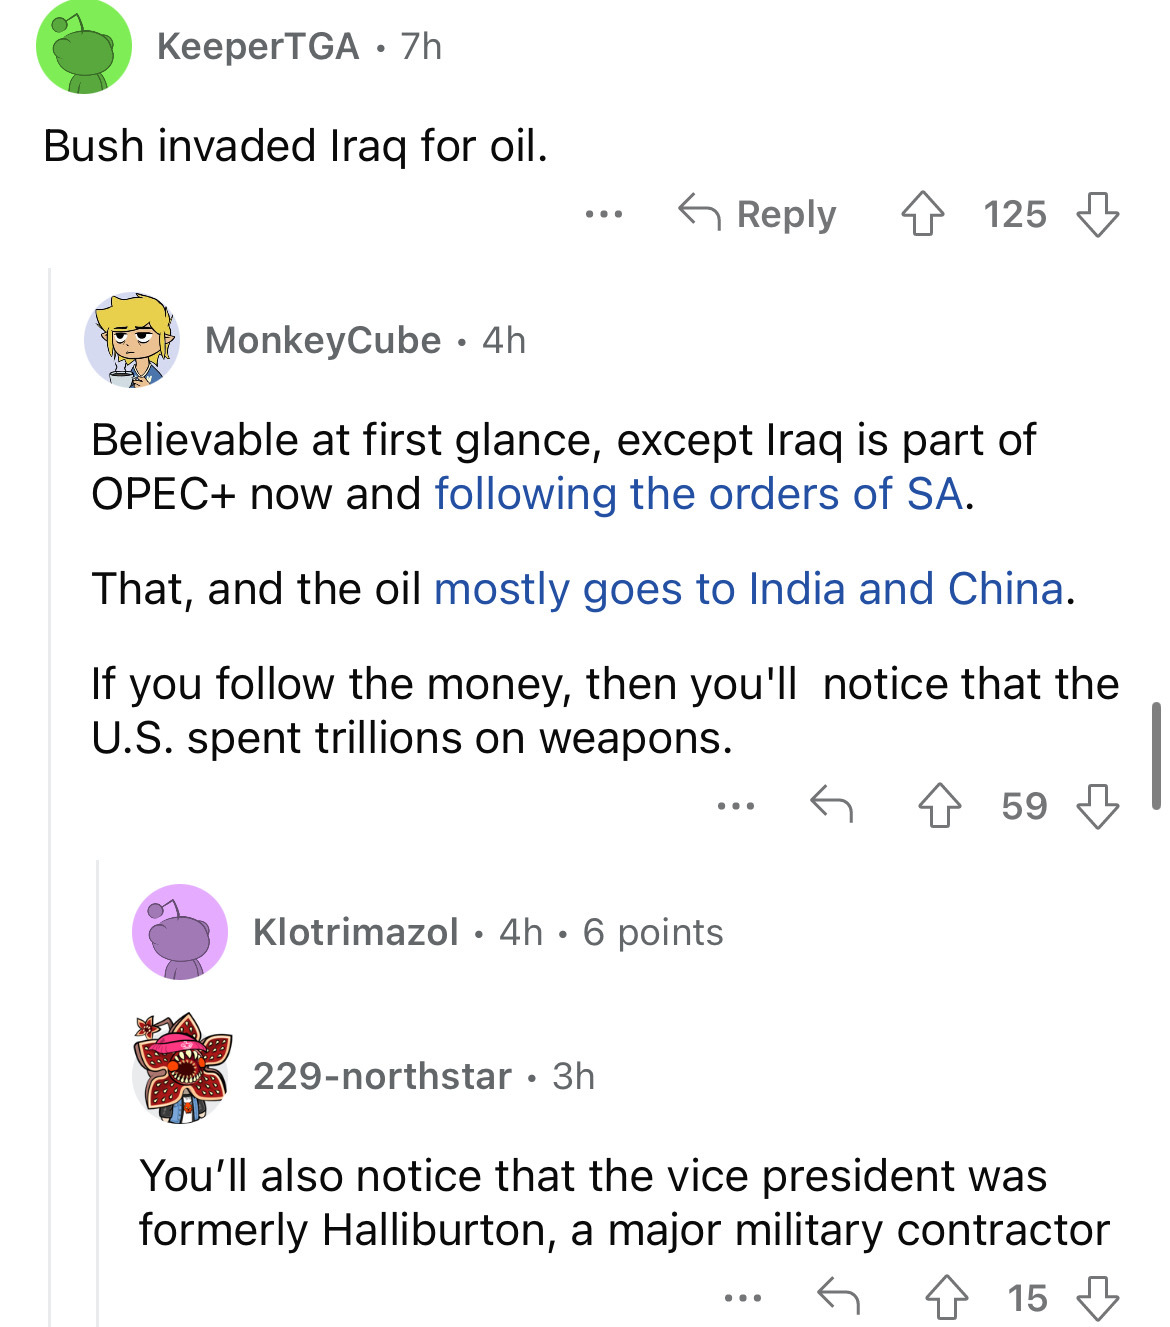 angle - KeeperTGA 7h Bush invaded Iraq for oil. ... 125 MonkeyCube 4h Believable at first glance, except Iraq is part of Opec now and ing the orders of Sa. That, and the oil mostly goes to India and China. If you the money, then you'll notice that the U.S